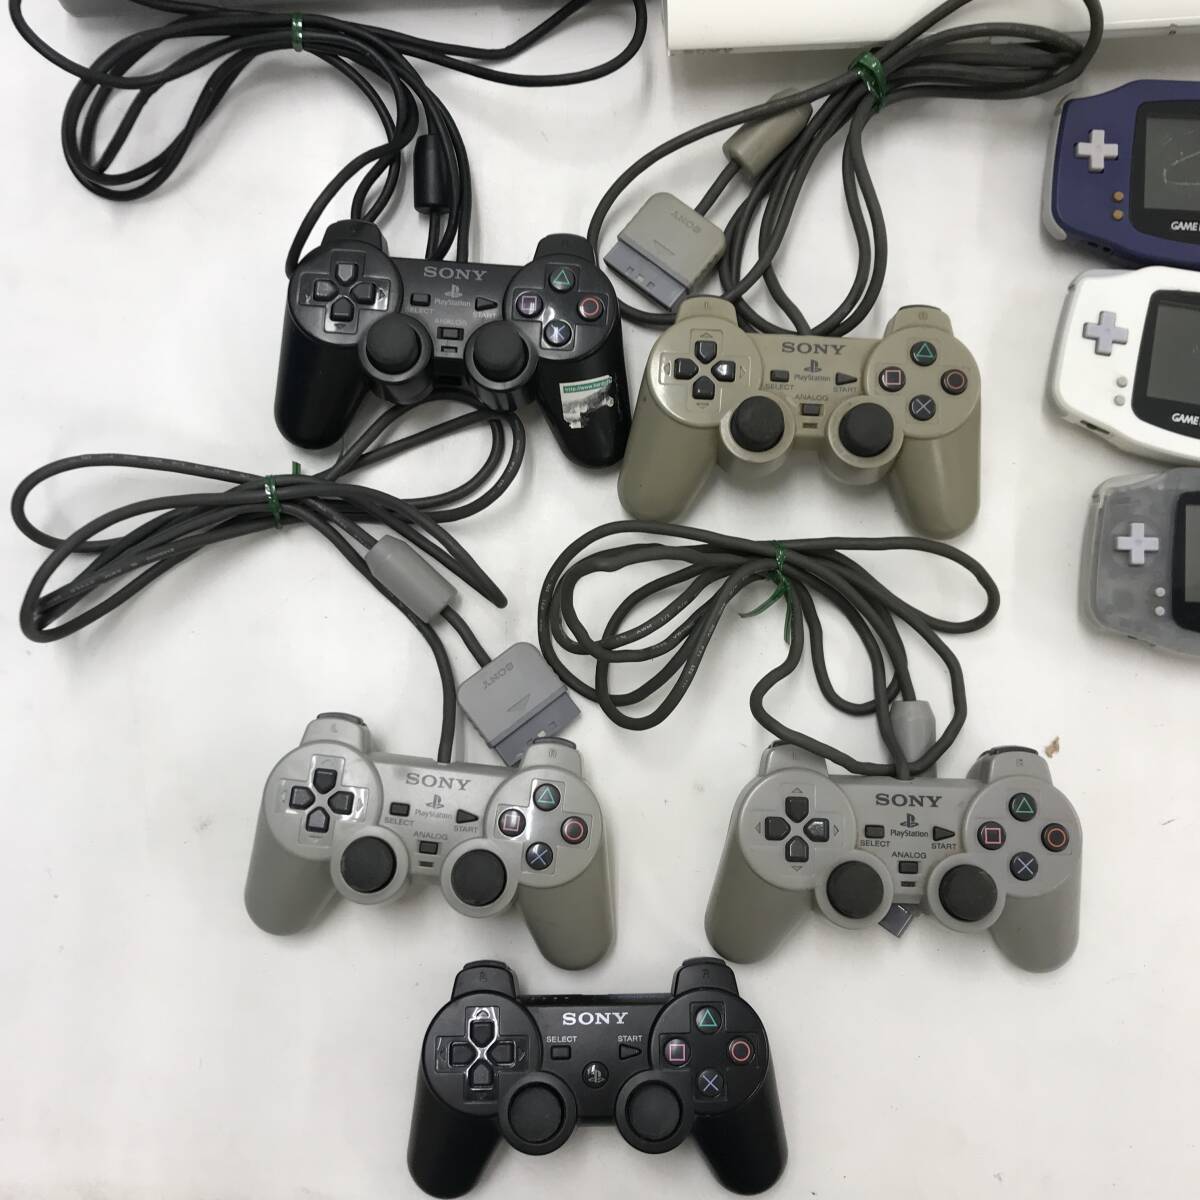 [1 jpy ~]PS PS3 PS4 Family computer WiiU Game Boy game machine body other set sale * operation not yet verification operation defect [ junk ]